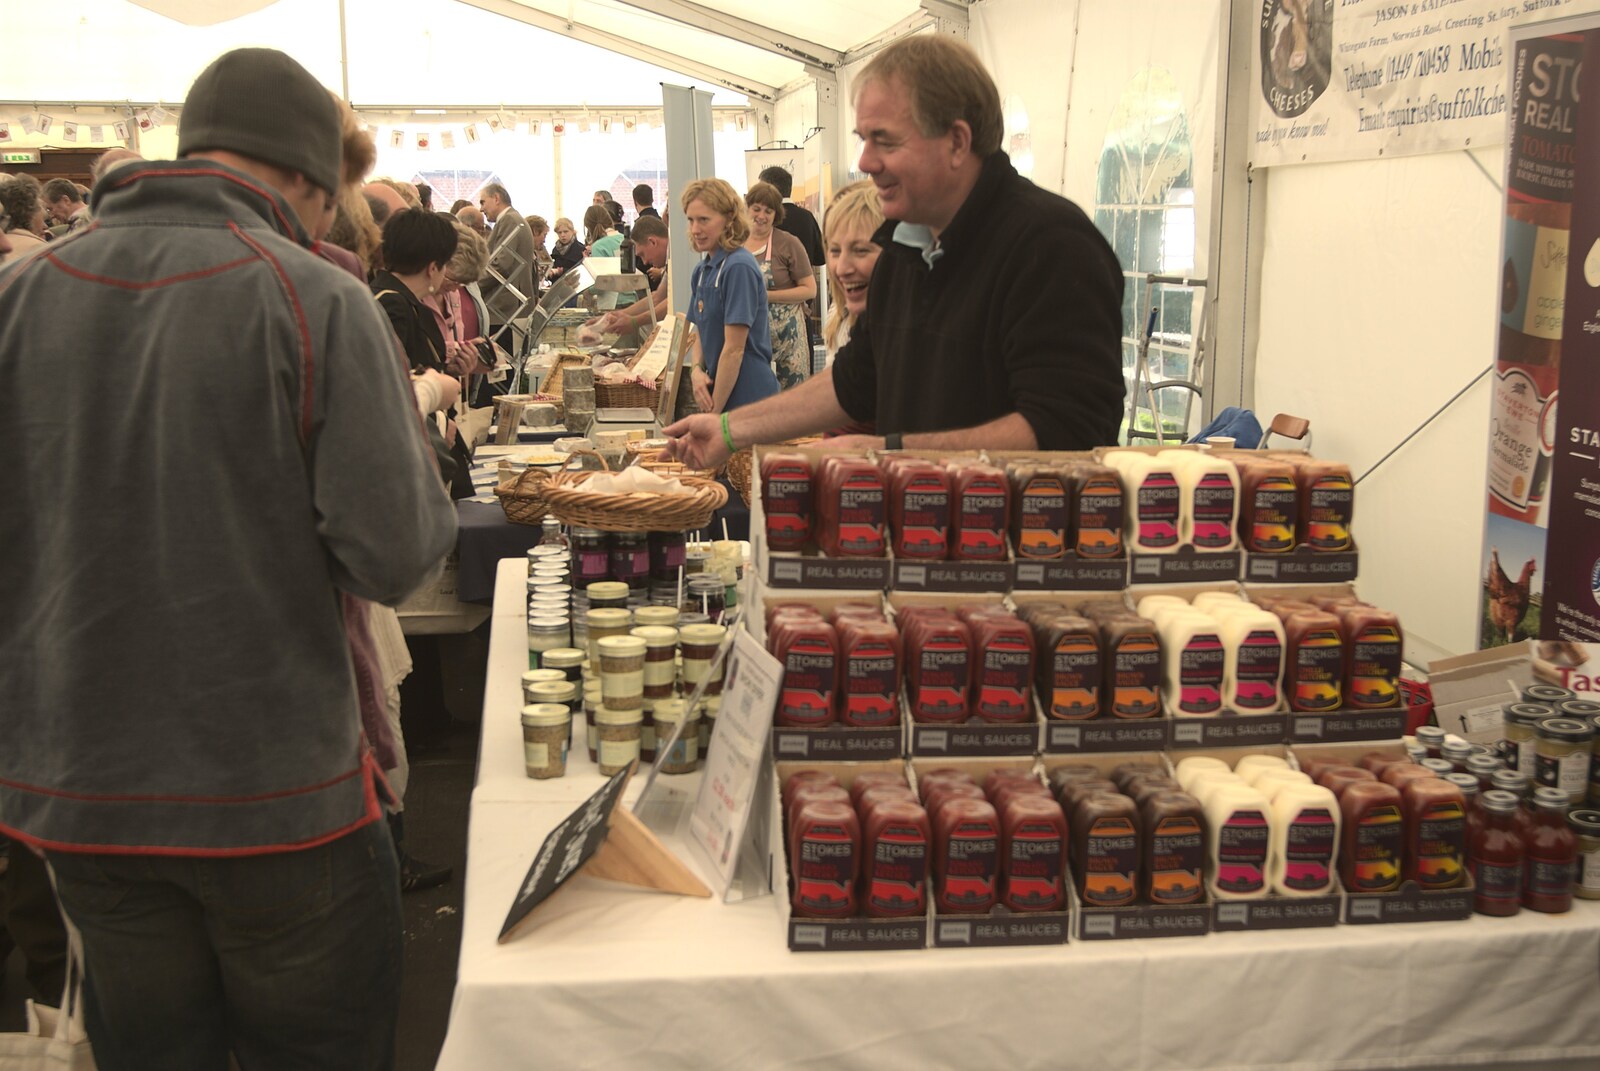 The Aldeburgh Food Festival, Snape Maltings, Suffolk - 25th September 2010: The Stokes sauces stand